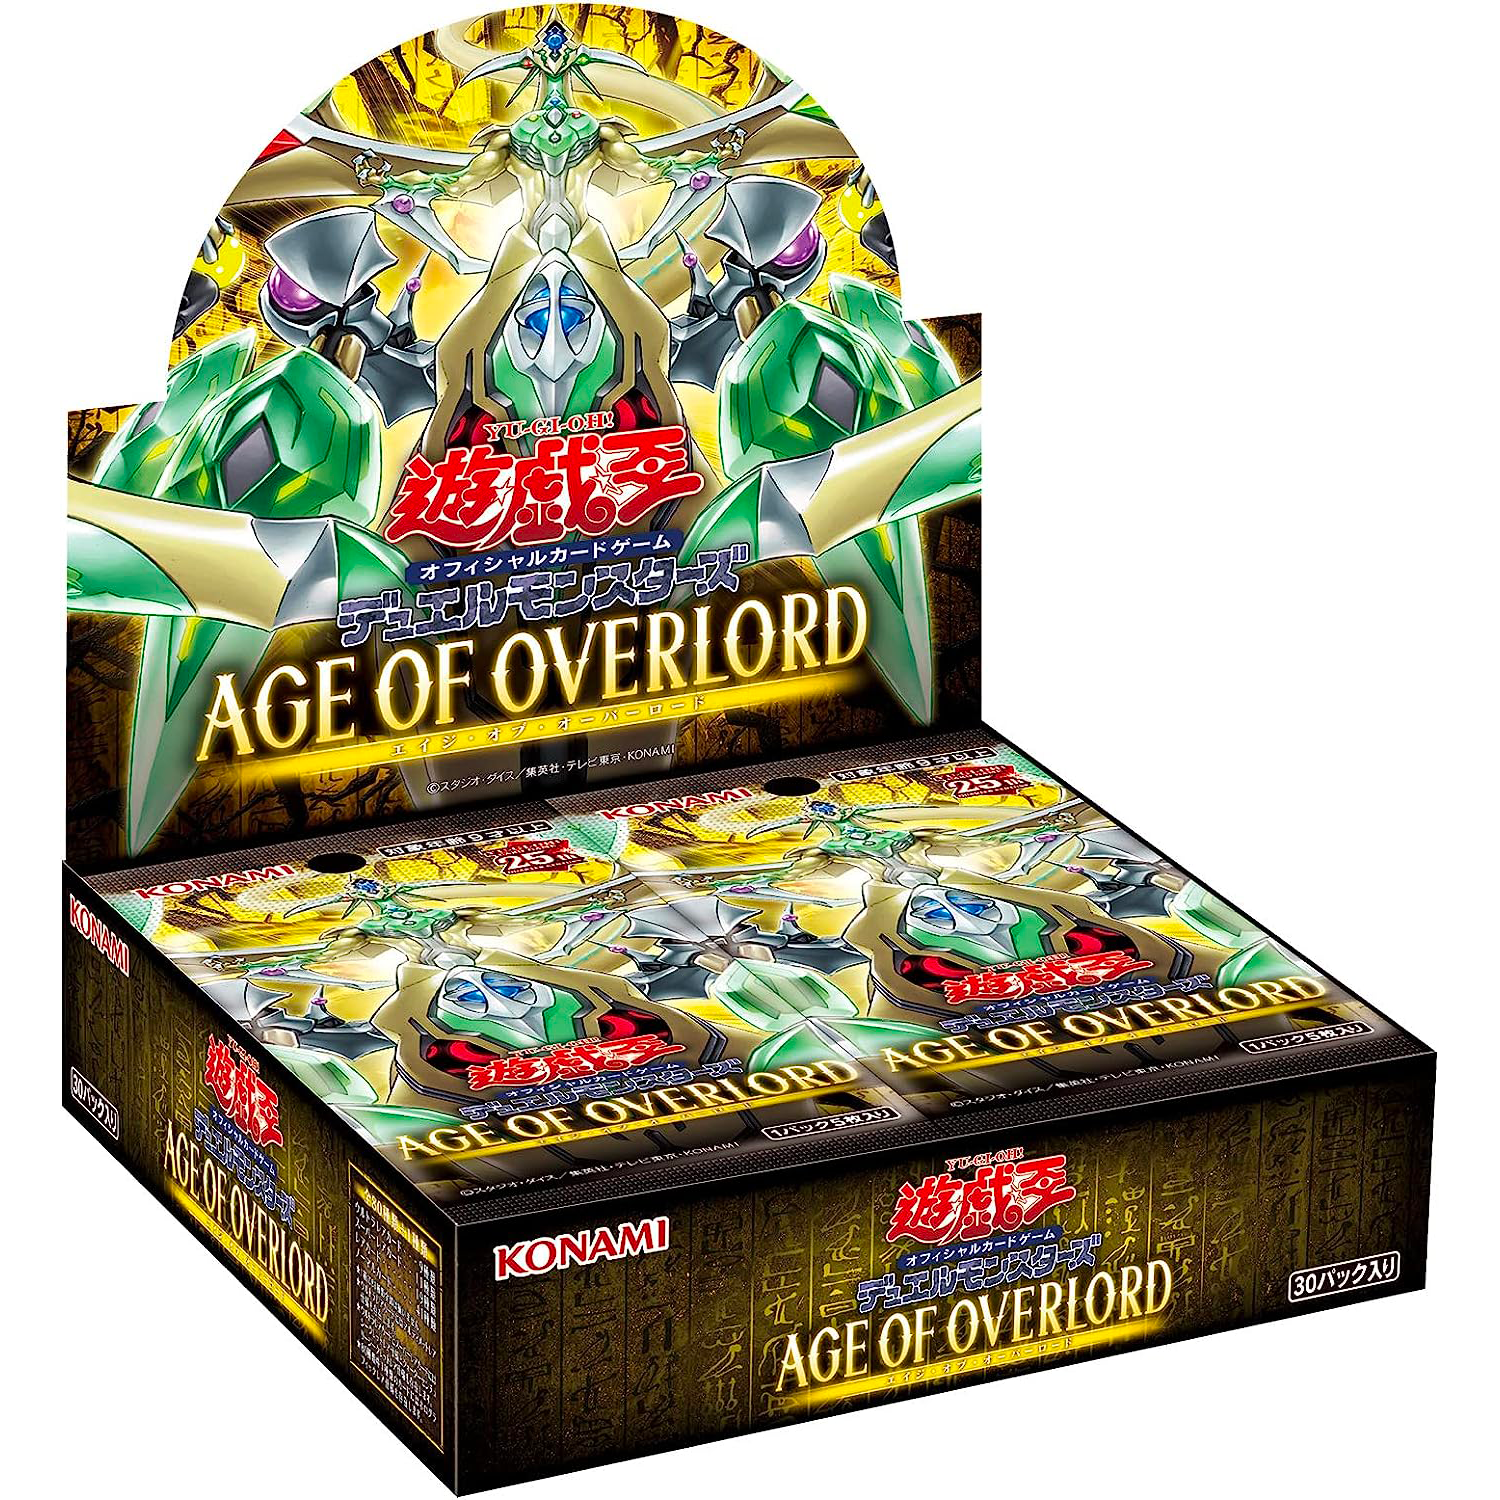 Yu-Gi-Oh! Official Card Game Duel Monsters ｢AGE OF OVERLORD｣ Box